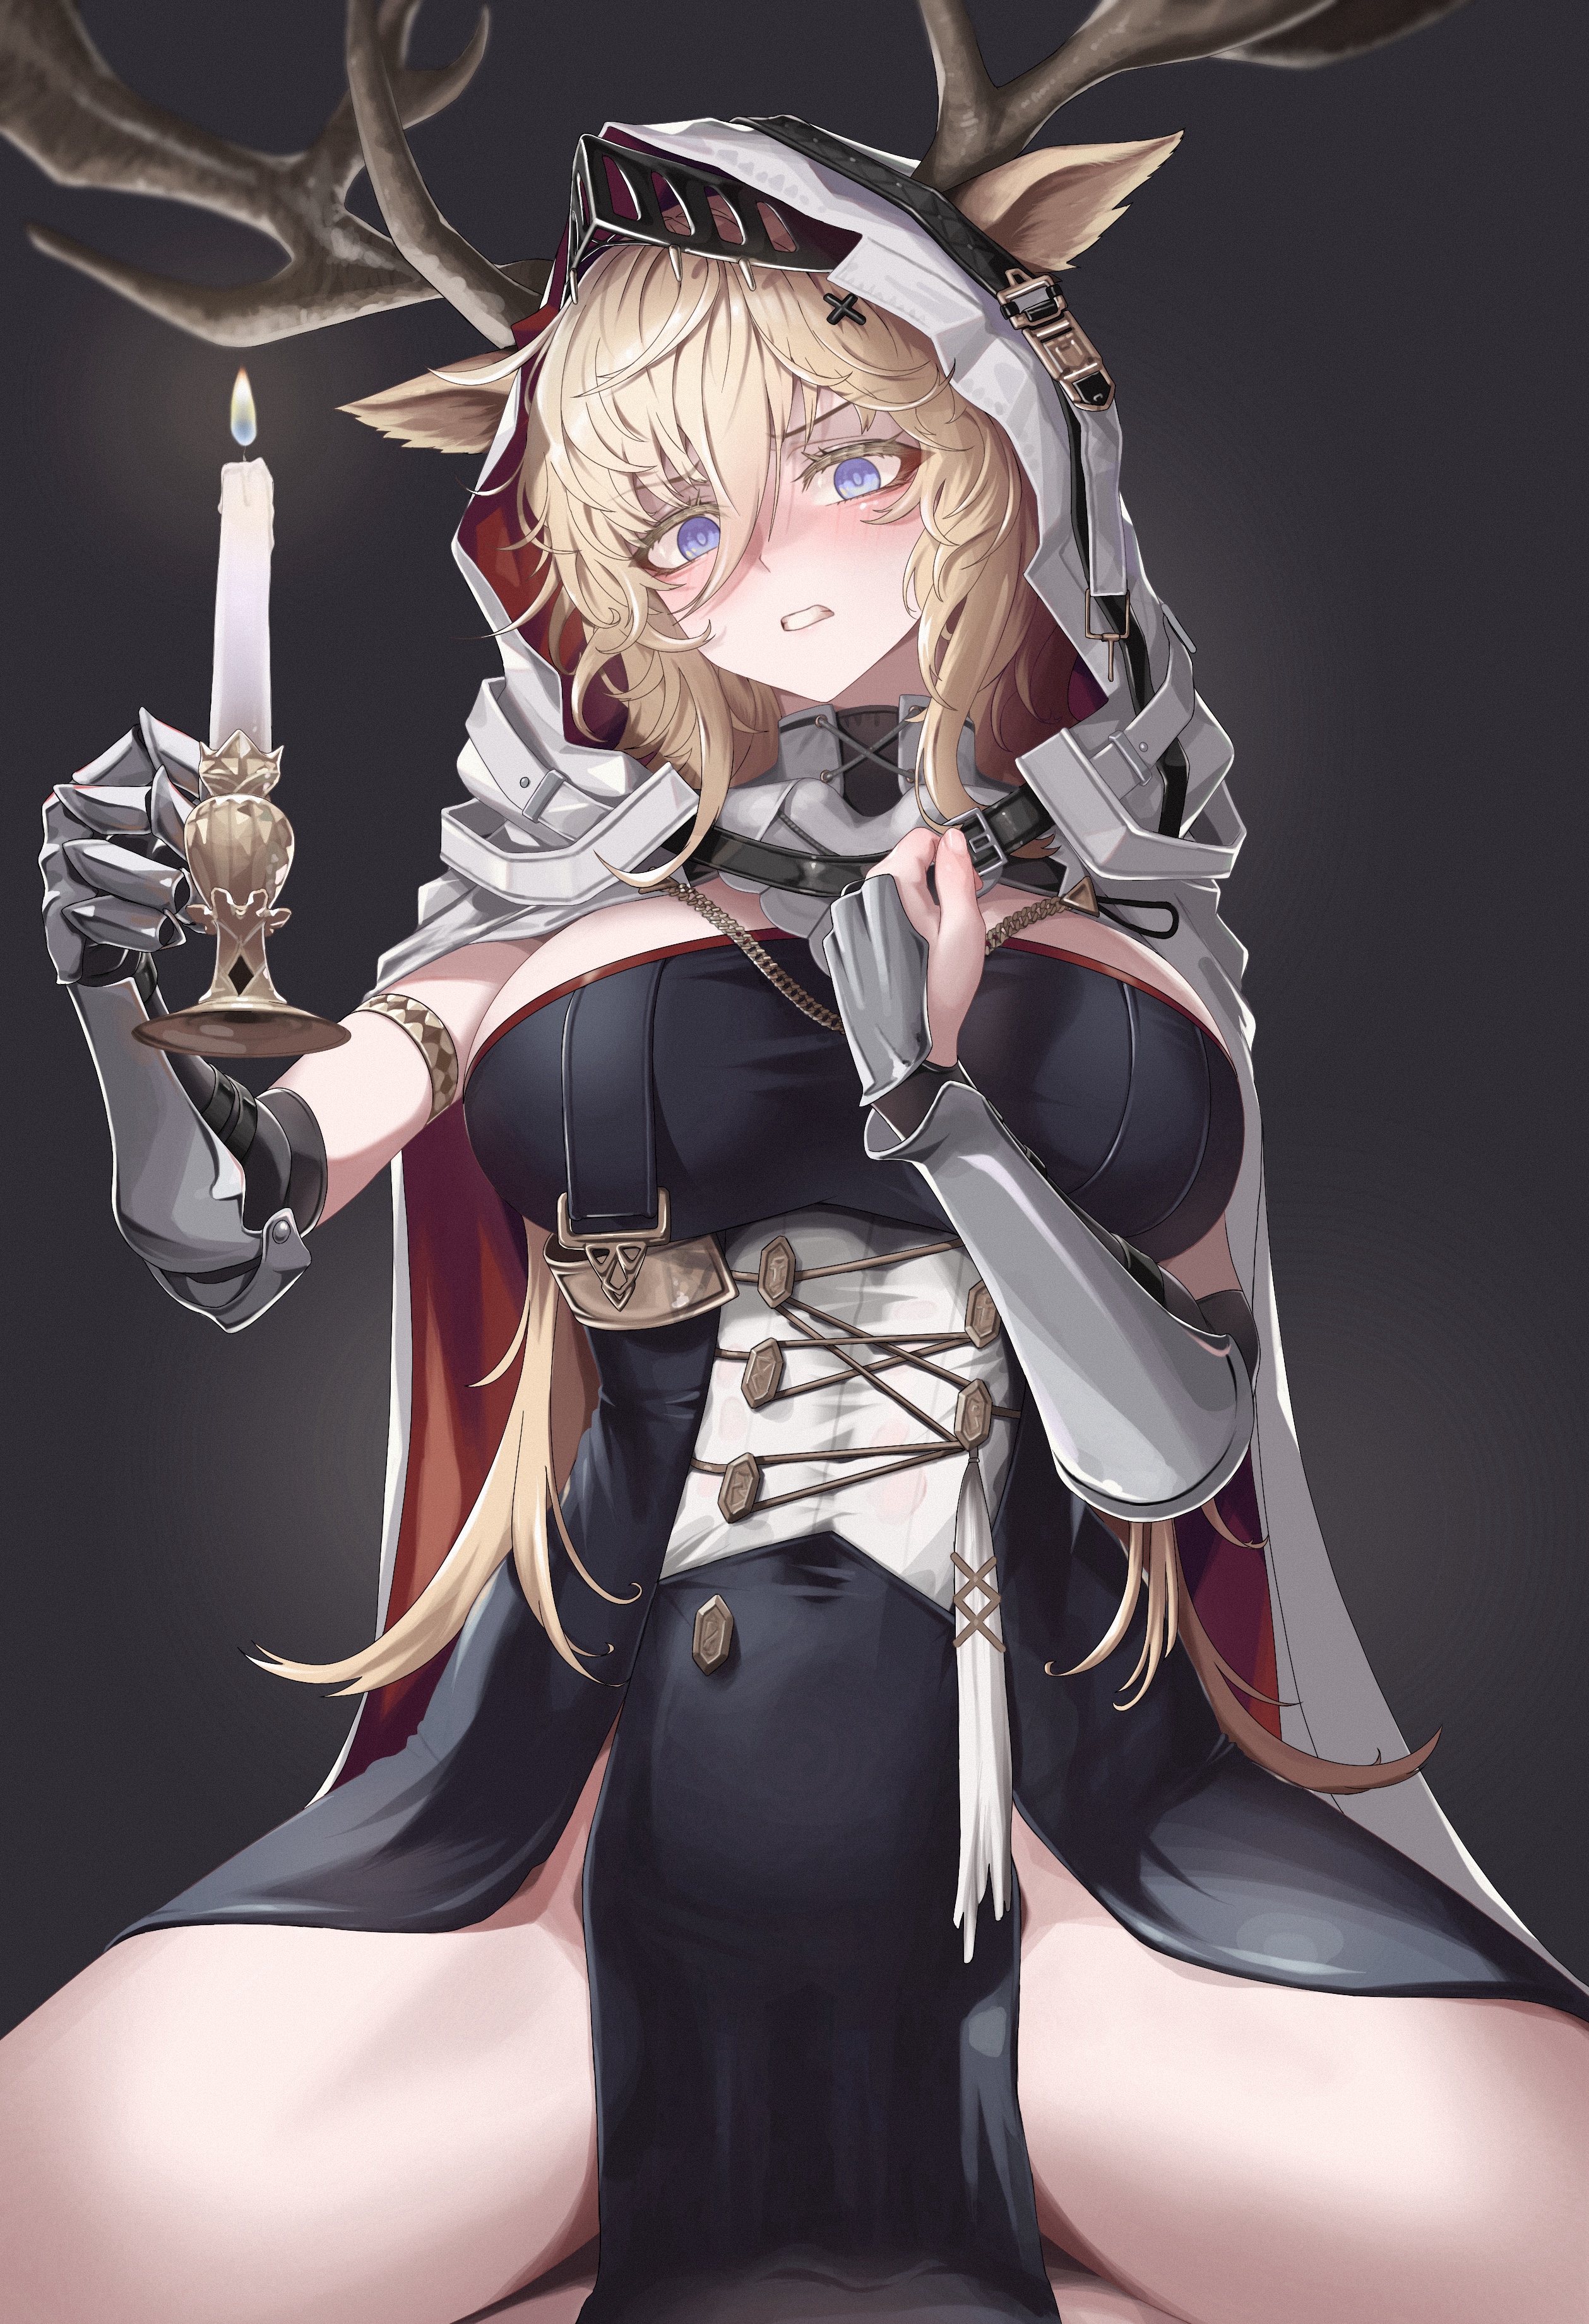 Anime 2517x3682 Arknights anime girls The Candle Knight Viviana (Arknights) MildT portrait display looking at viewer anime hair between eyes blonde blue eyes big boobs spread legs long hair simple background fire candles animal ears armor antlers legs thighs blushing